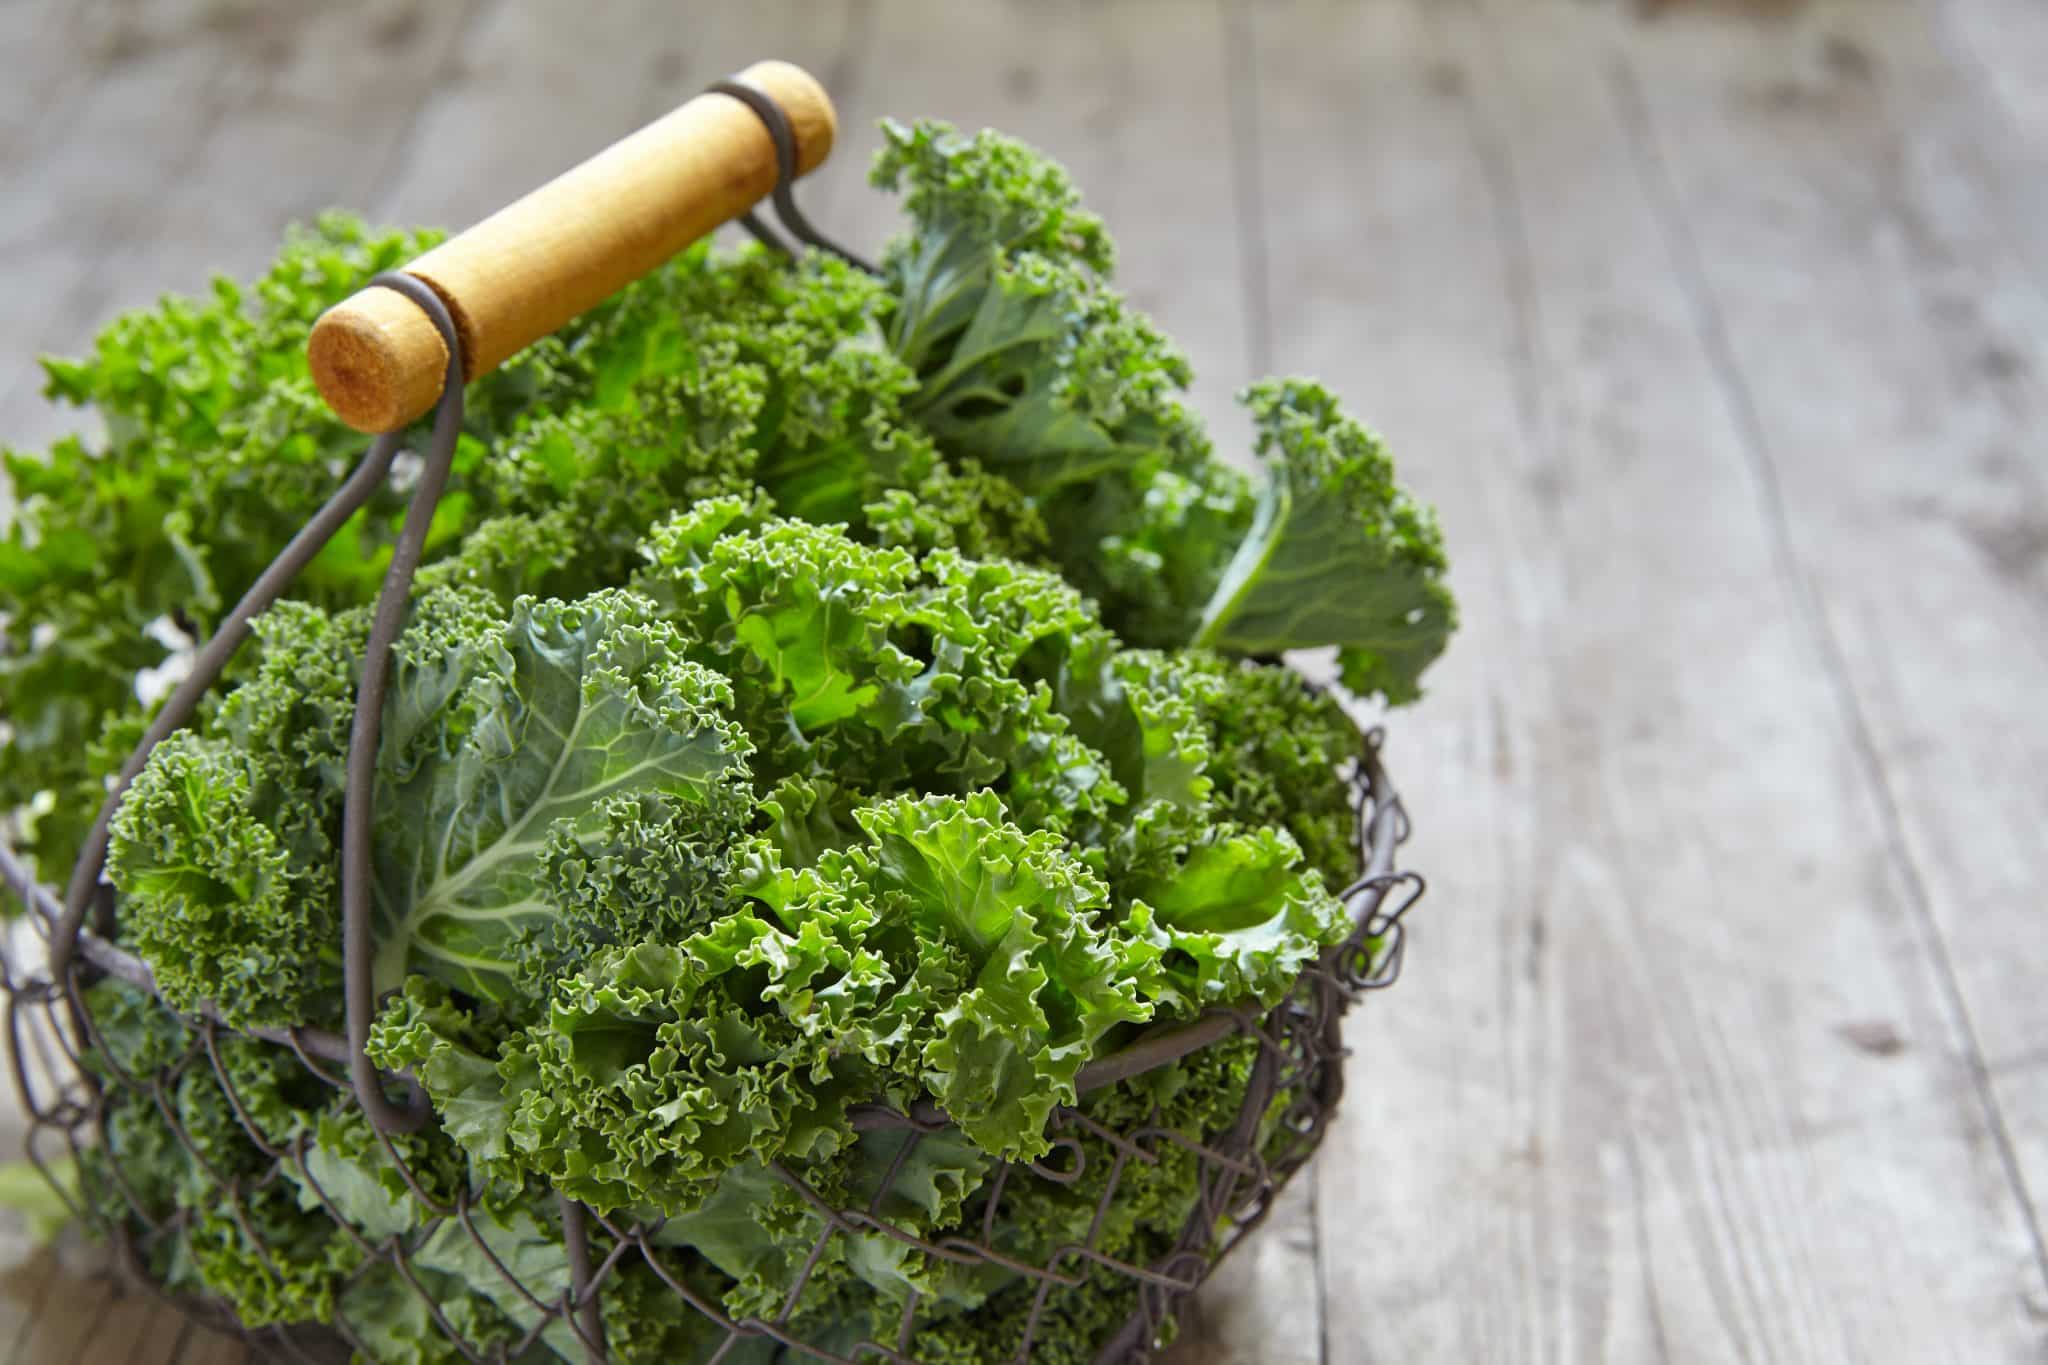 Can Kale Go Bad? - Can It Go Bad?